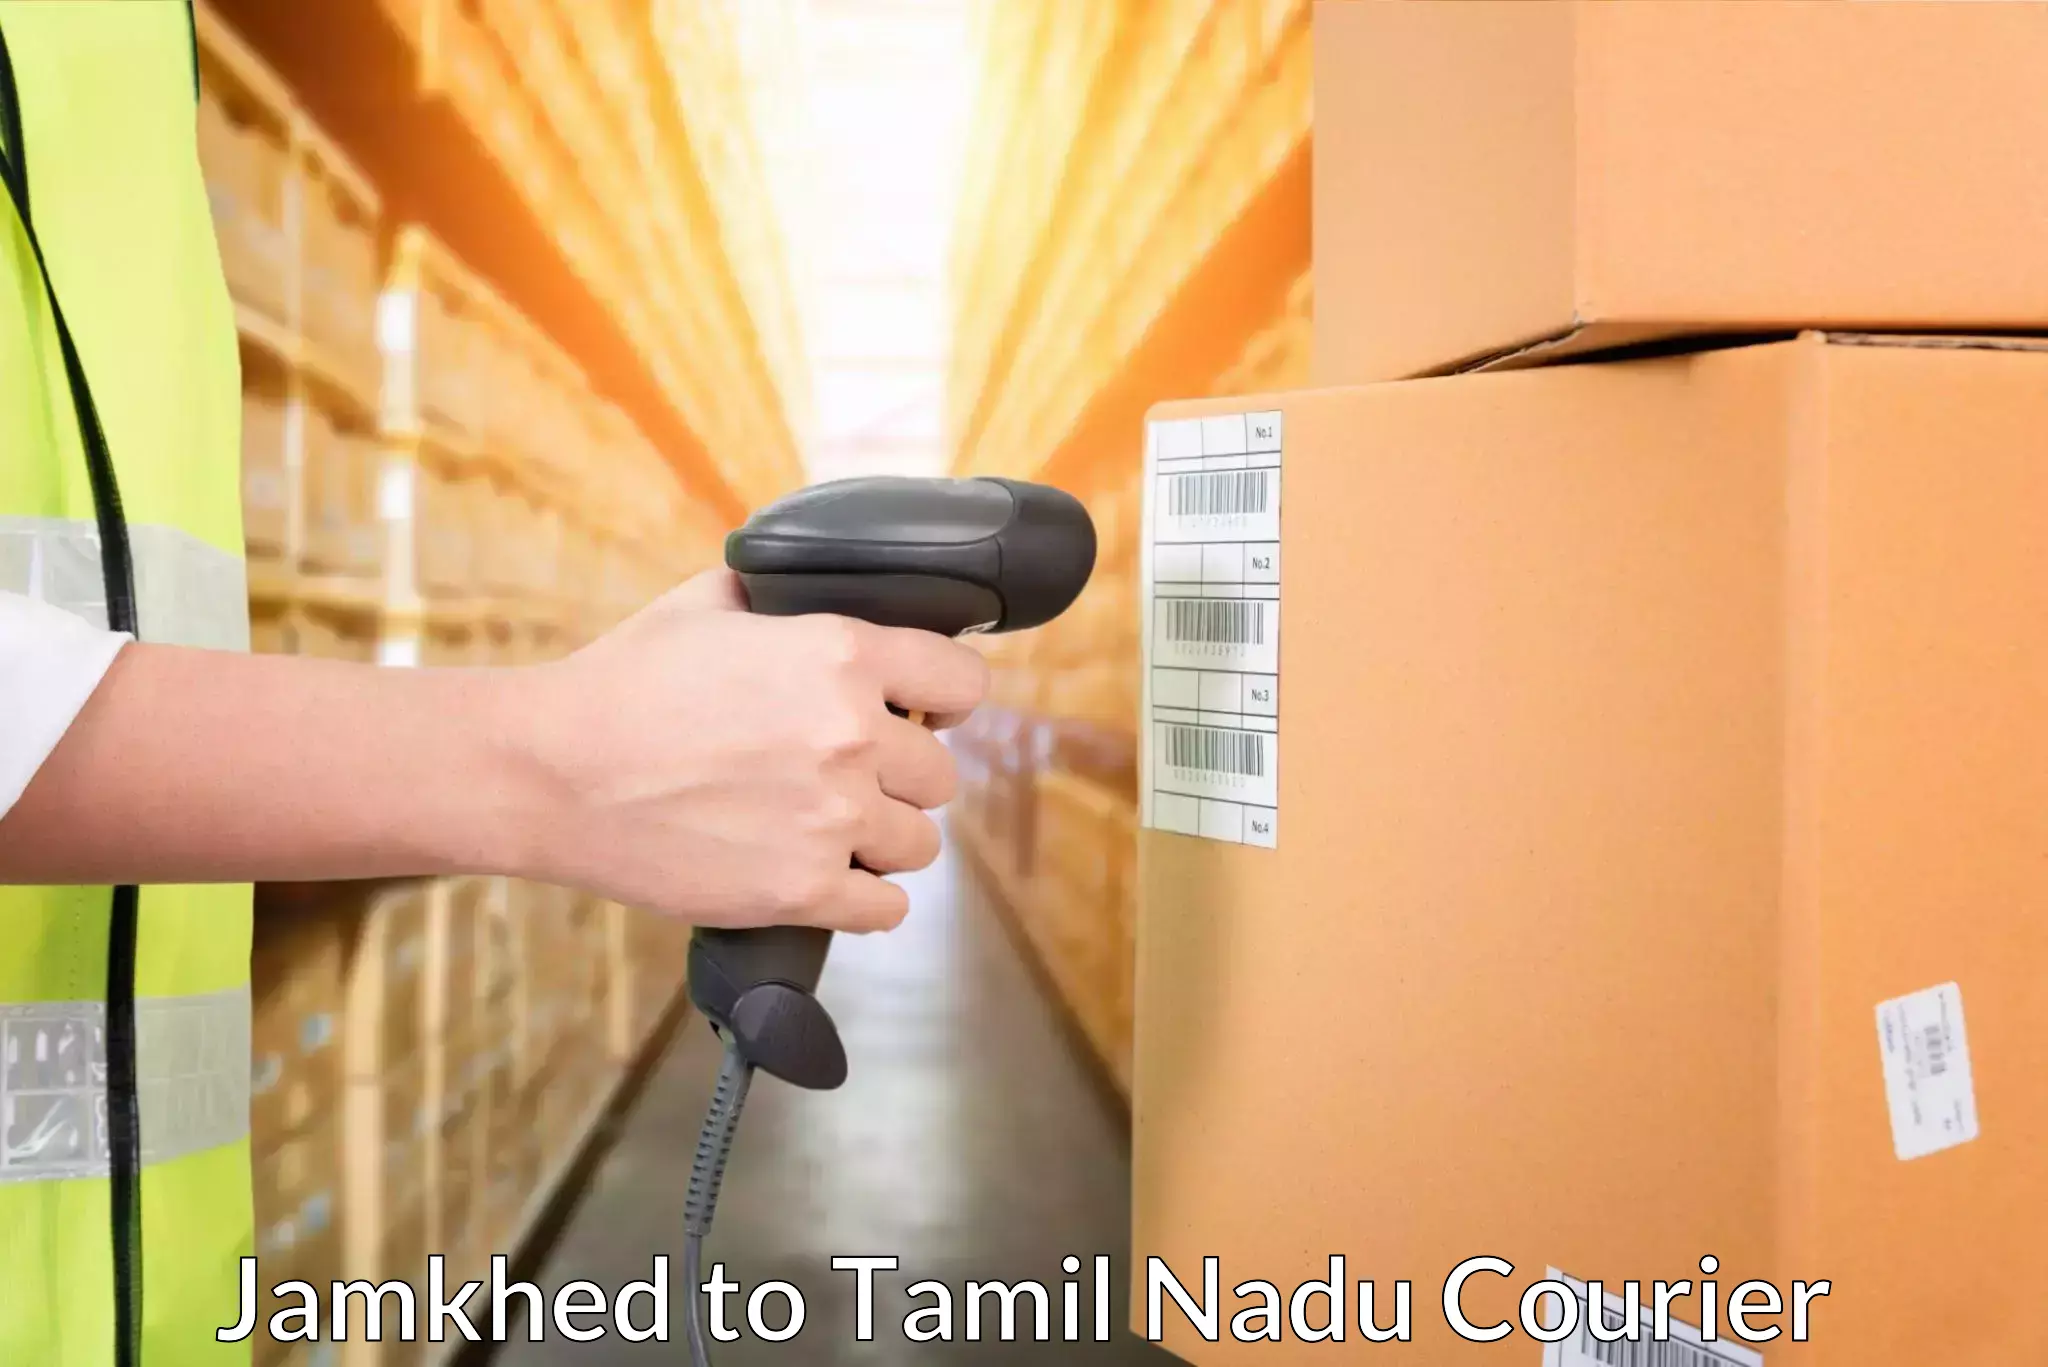 Express package handling Jamkhed to Vellore Institute of Technology